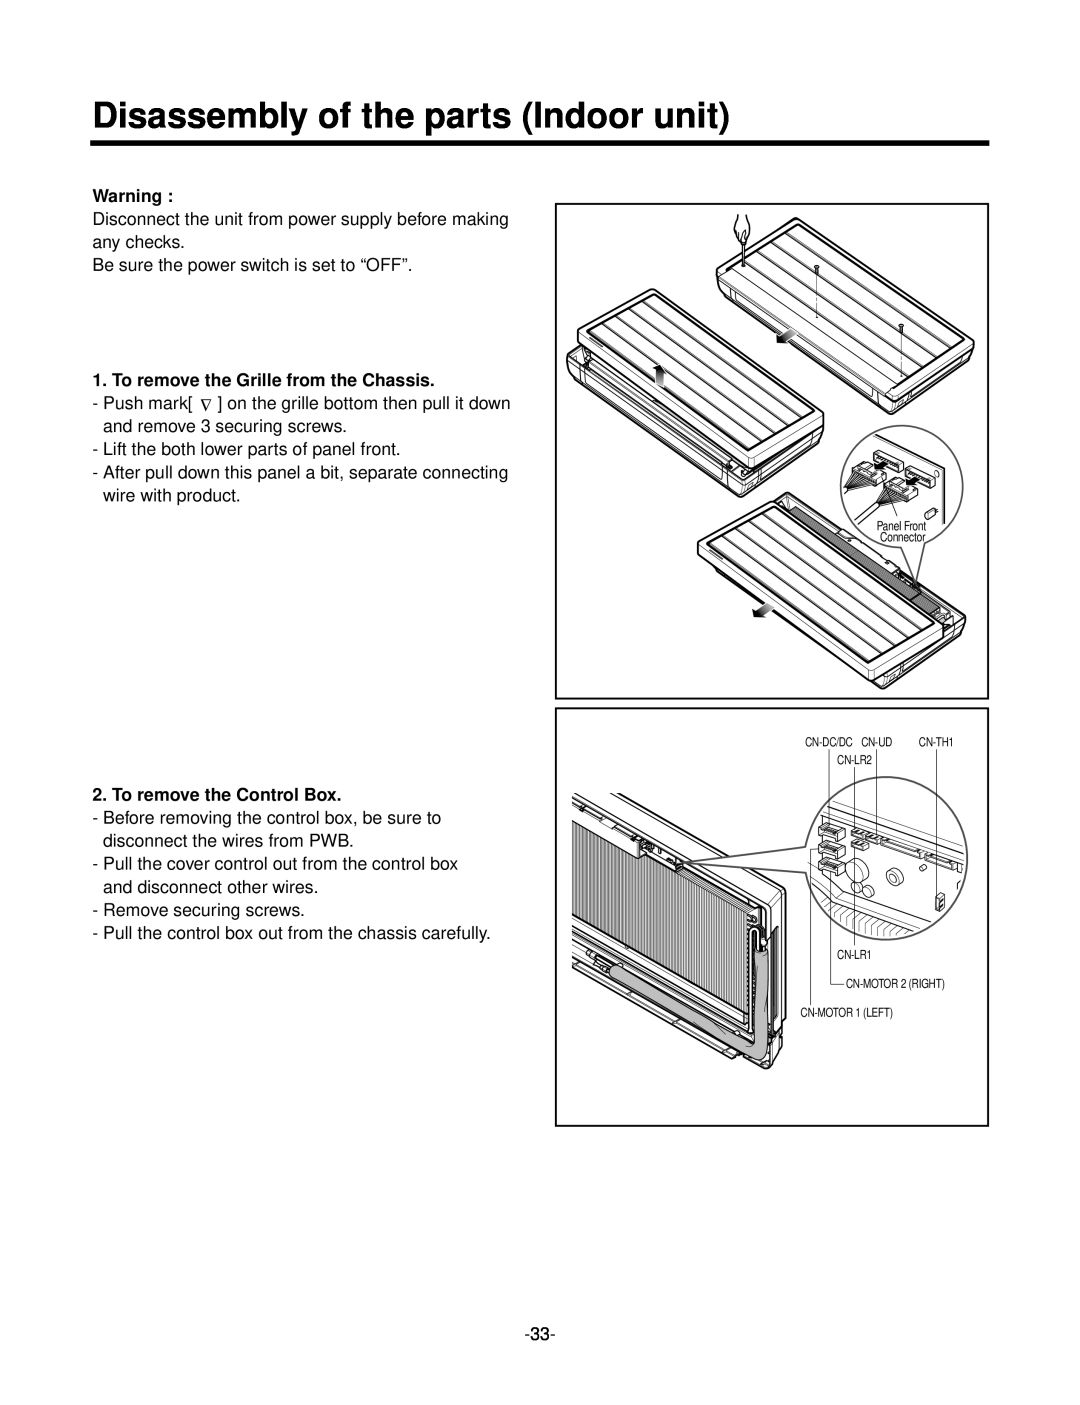 LG Electronics LSC183VMA service manual Disassembly of the parts Indoor unit, To remove the Grille from the Chassis 